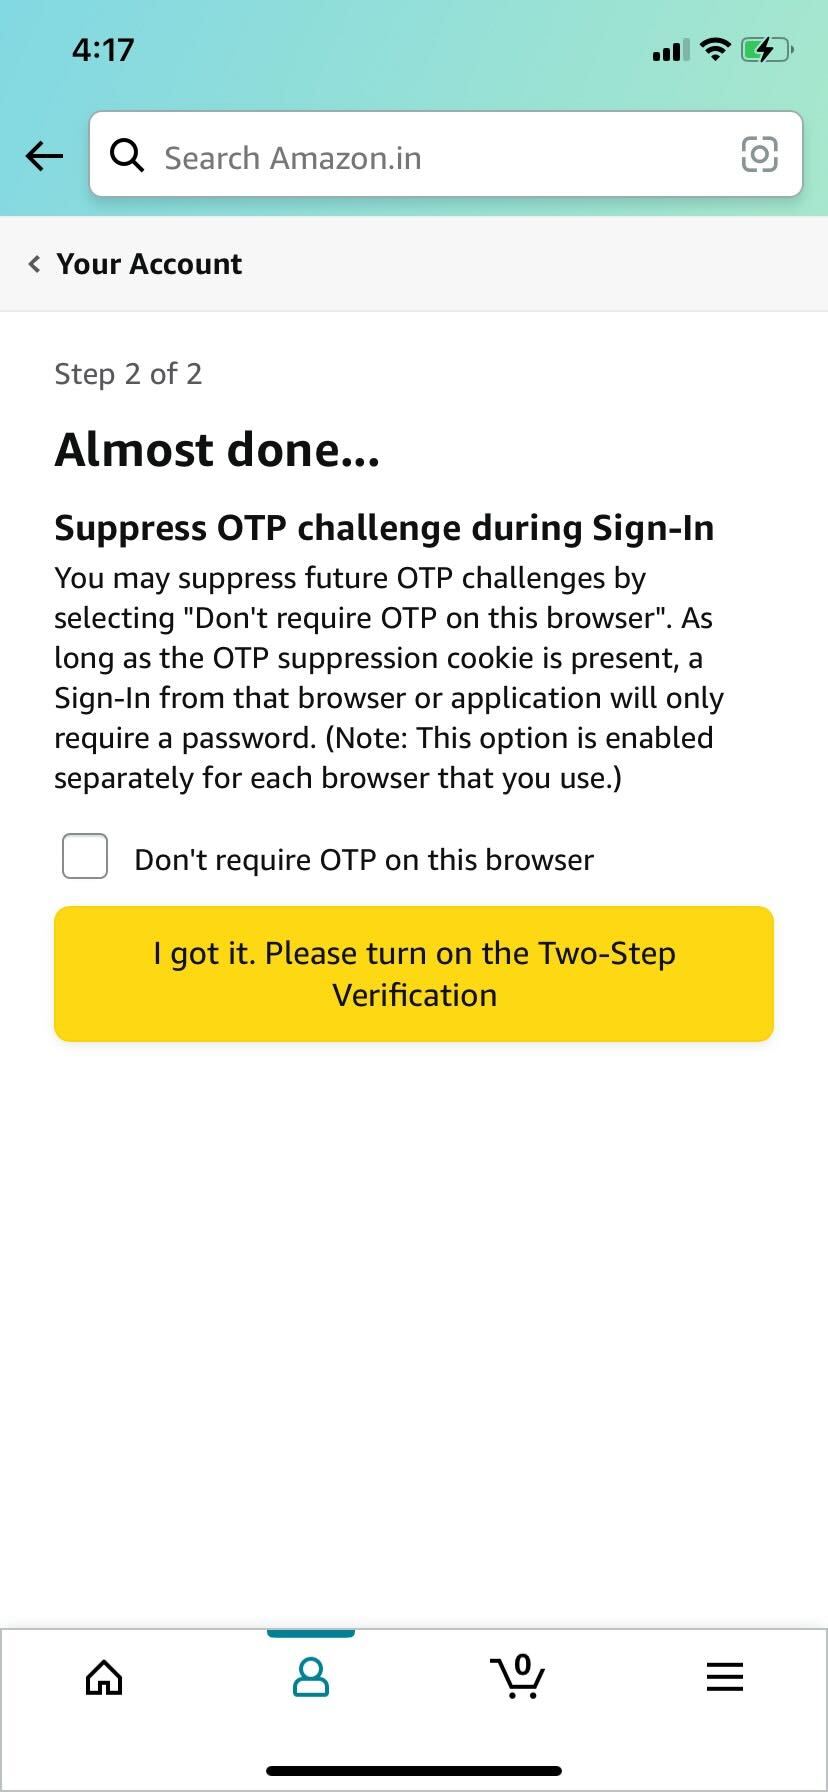 Amazon app I got it. Please turn on the Two-Step Verification button